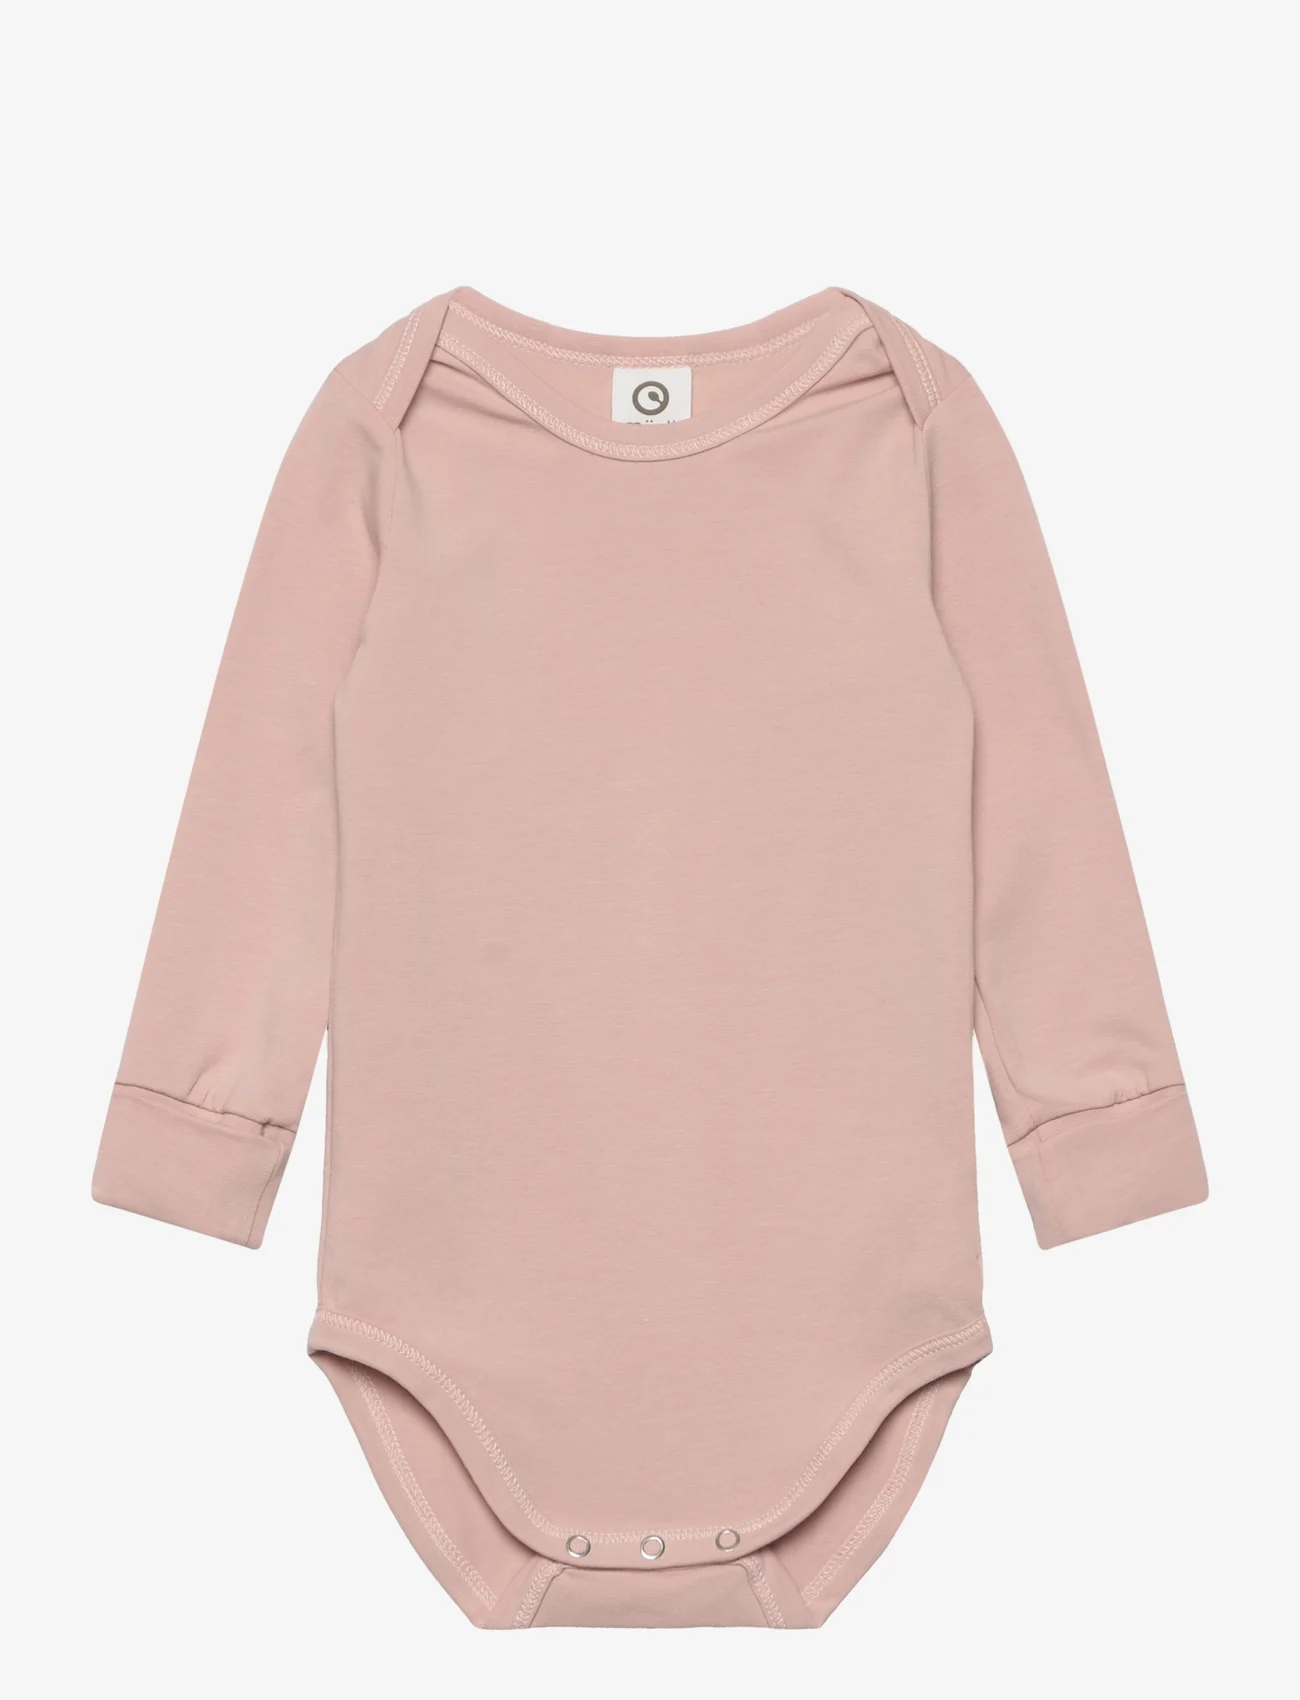 Müsli by Green Cotton - Cozy me l/s body - long-sleeved - spa rose - 0